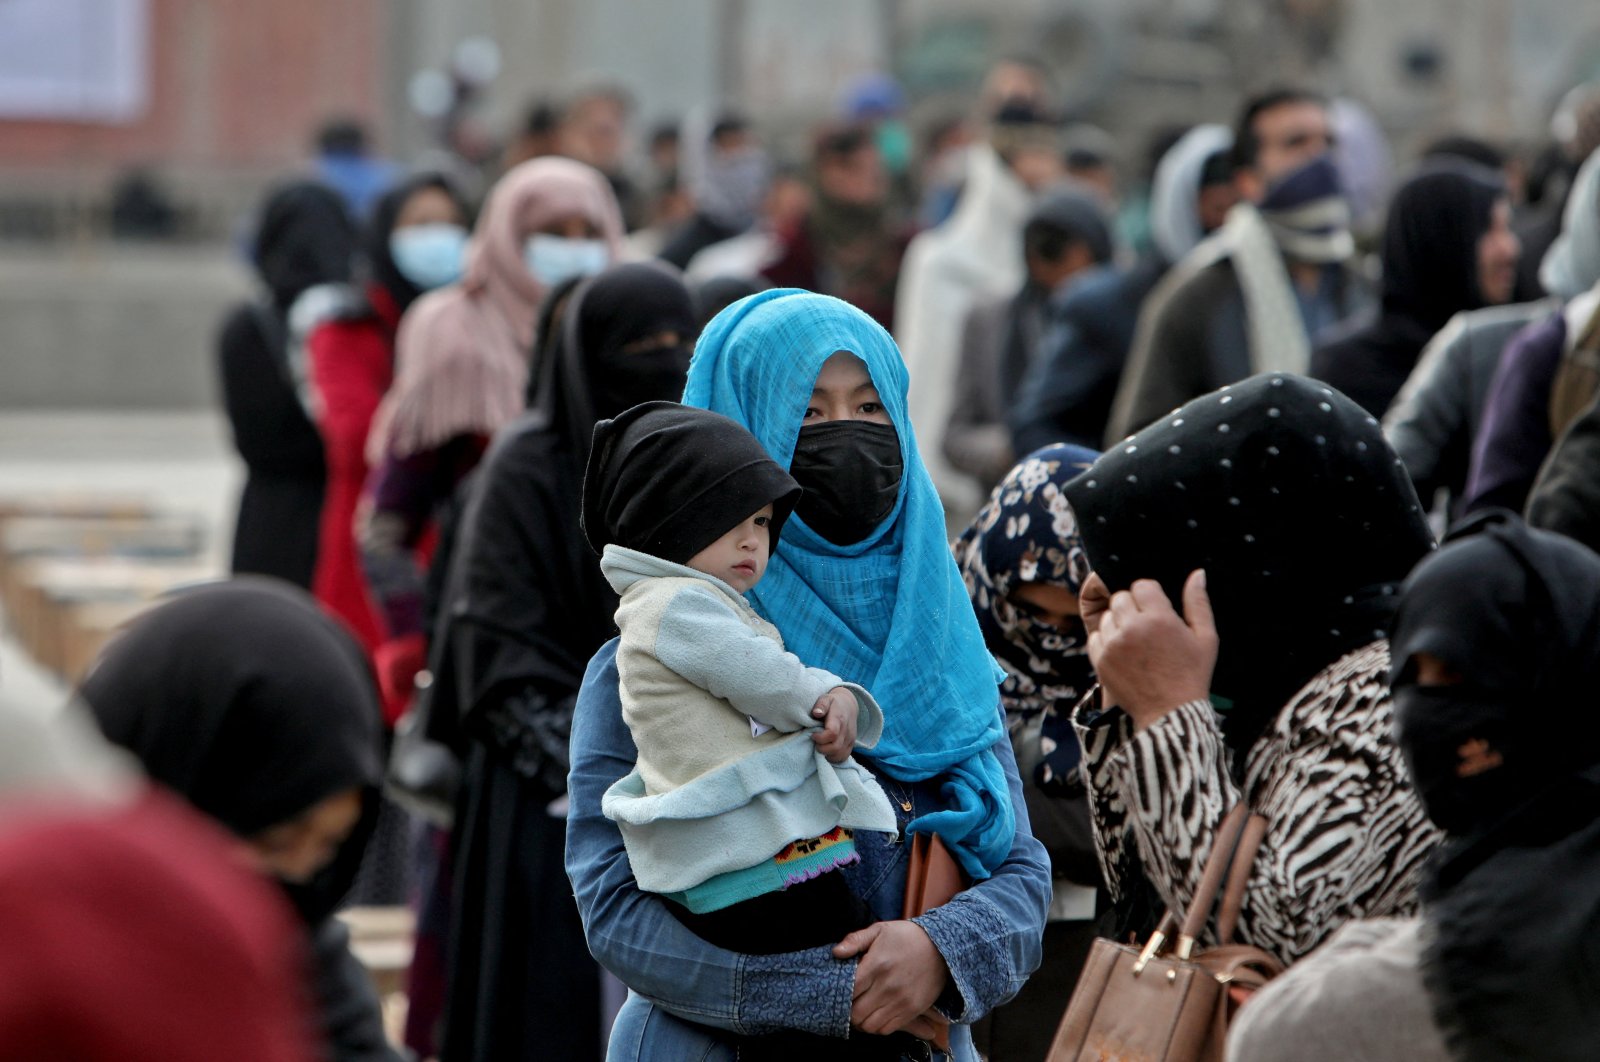 An Afghan woman holds her child as she and others wait to receive a package being distributed by a Turkish humanitarian aid group at a distribution center in Kabul, Afghanistan, Dec. 15, 2021. (Reuters Photo)